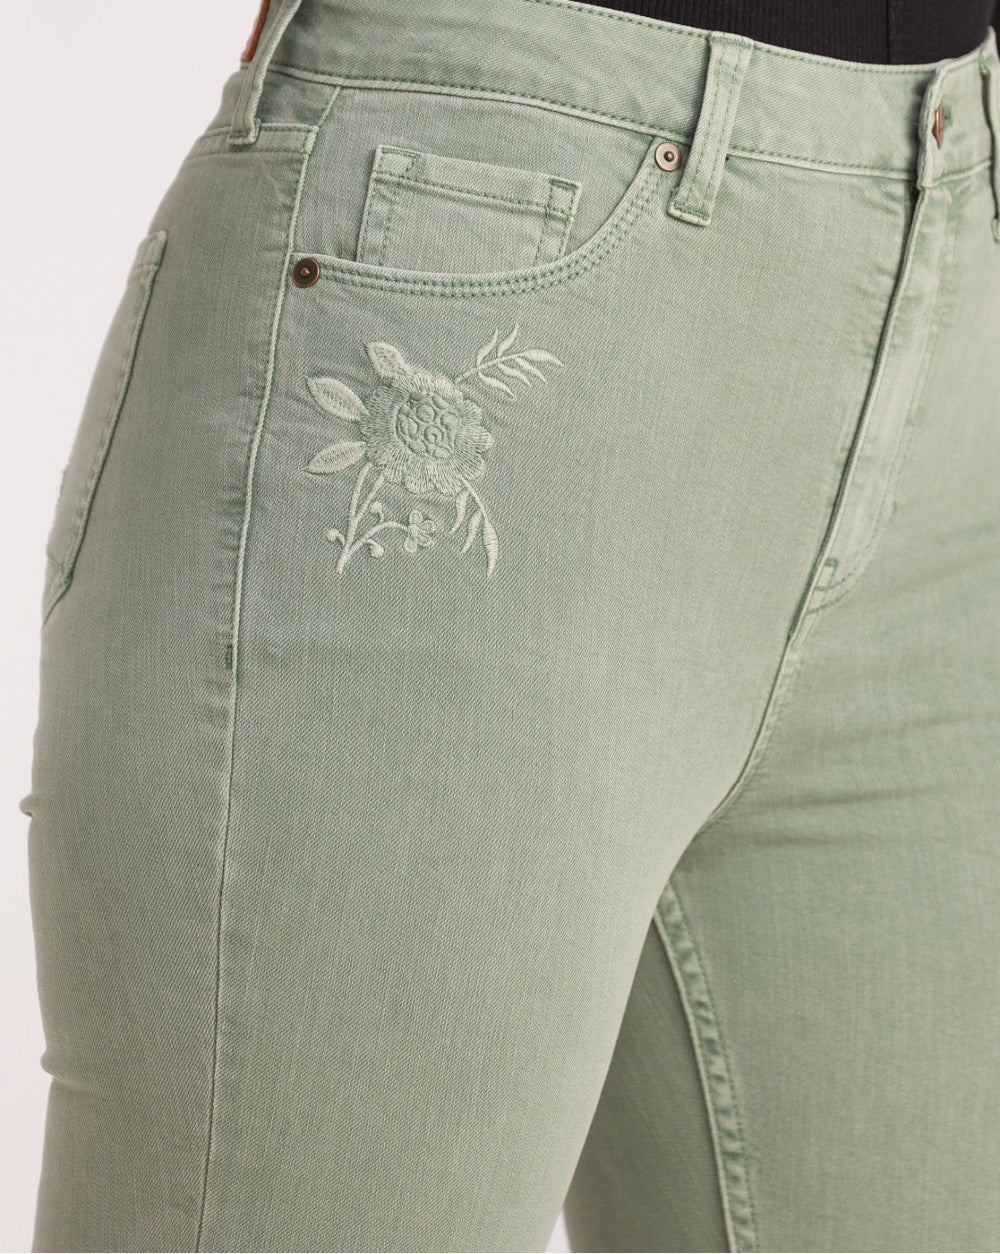 Skinny Fit High Waist Floral Embroidered Colored Jeans - Washed Jade